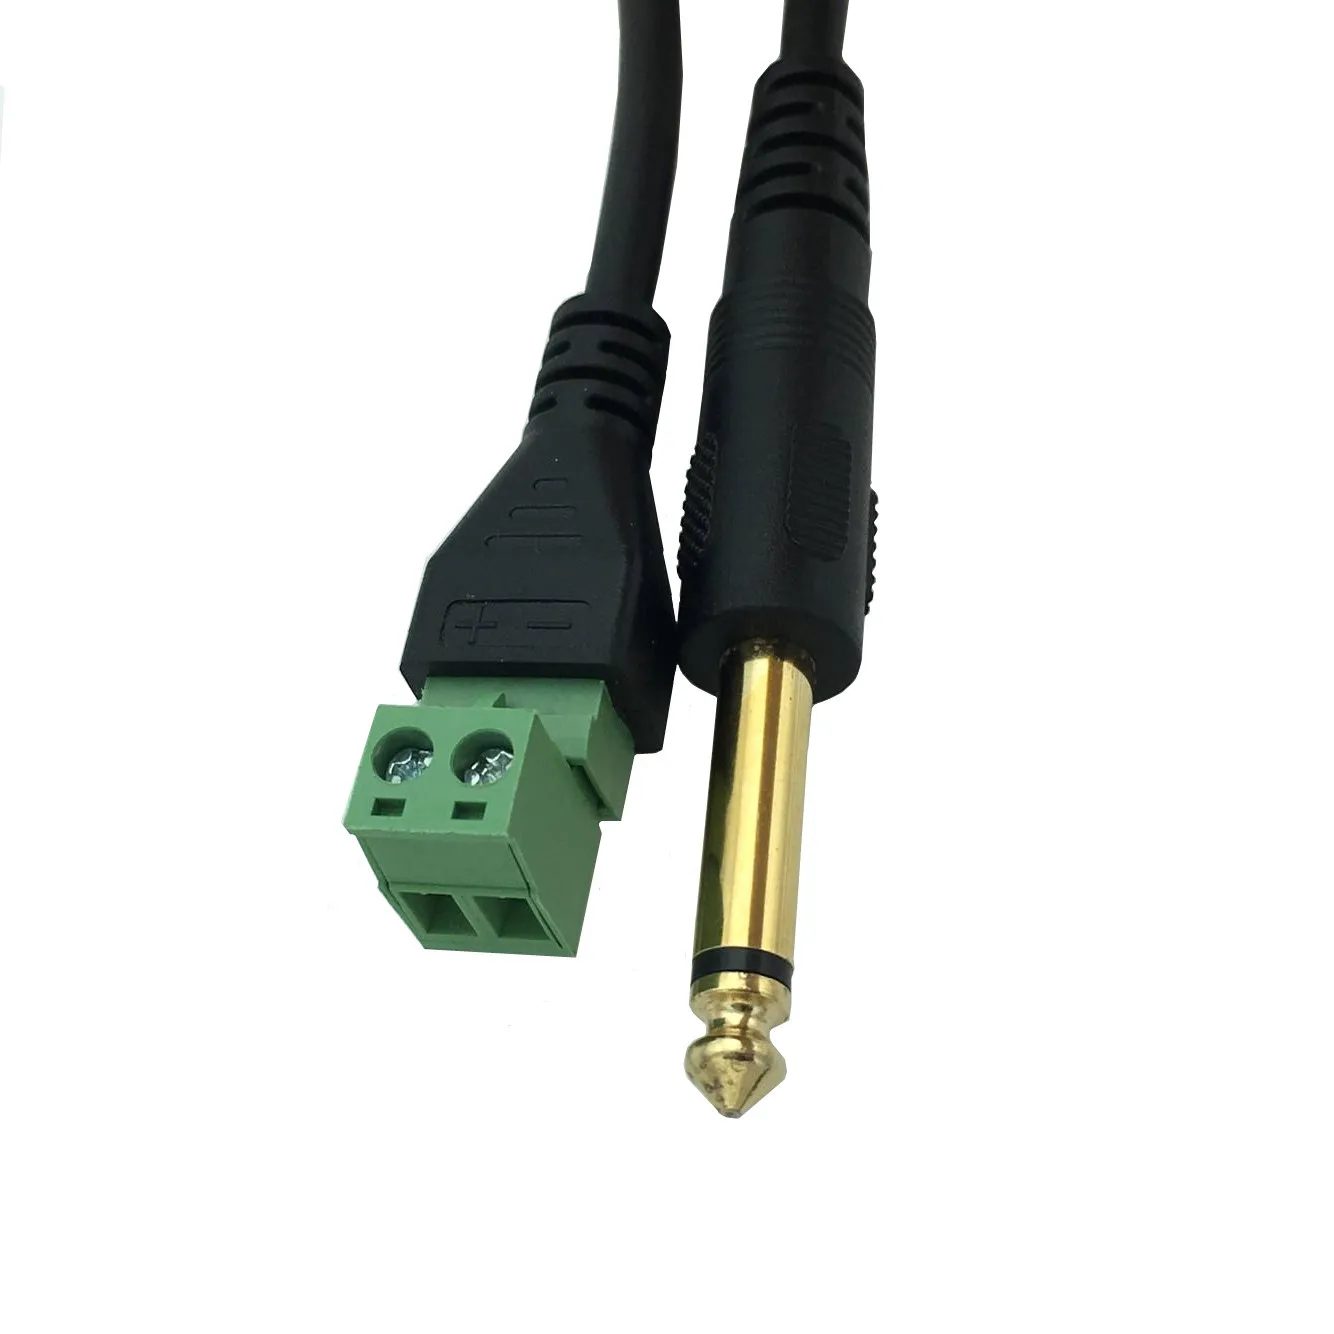 6.35mm Audio Mono Male to 2Pin Screw Terminal Female 30cm Converter Adapter Connector Cable Wire Audio 6.35mm Gold plated Male (62137680652)